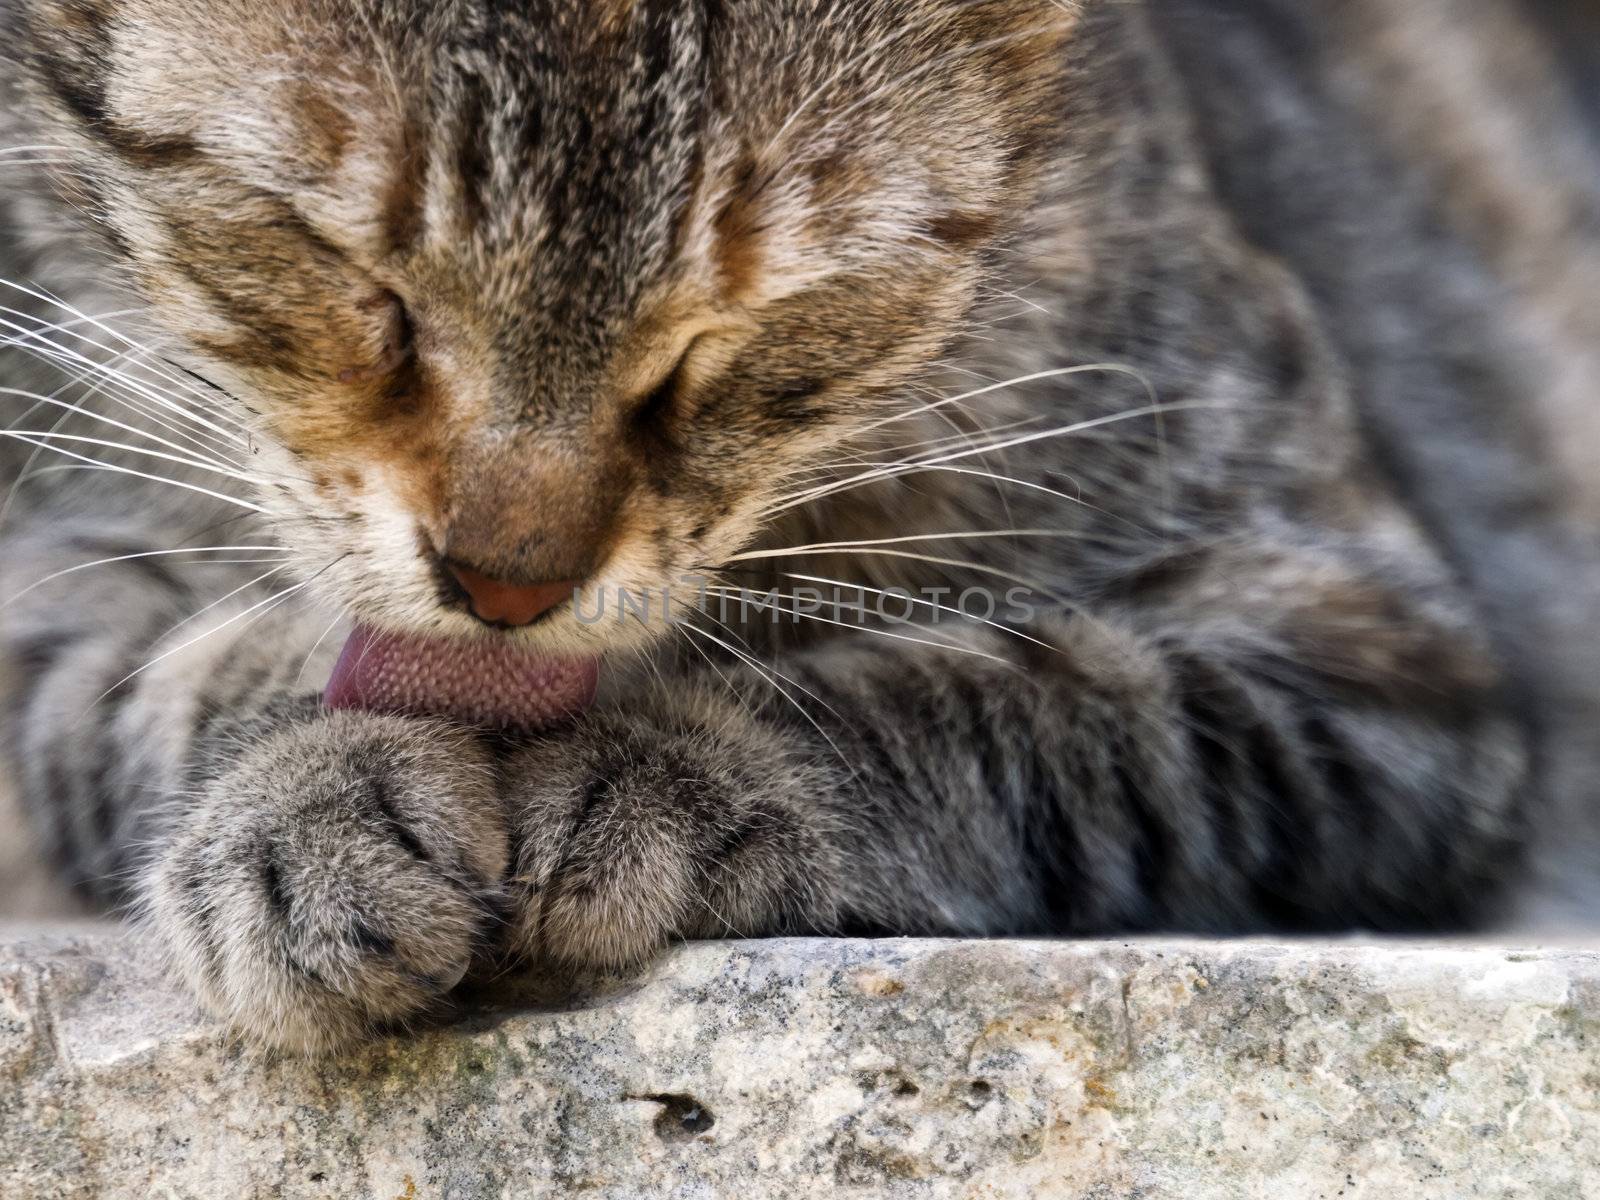 A cute little stray cat takes time to carry out some personal grooming